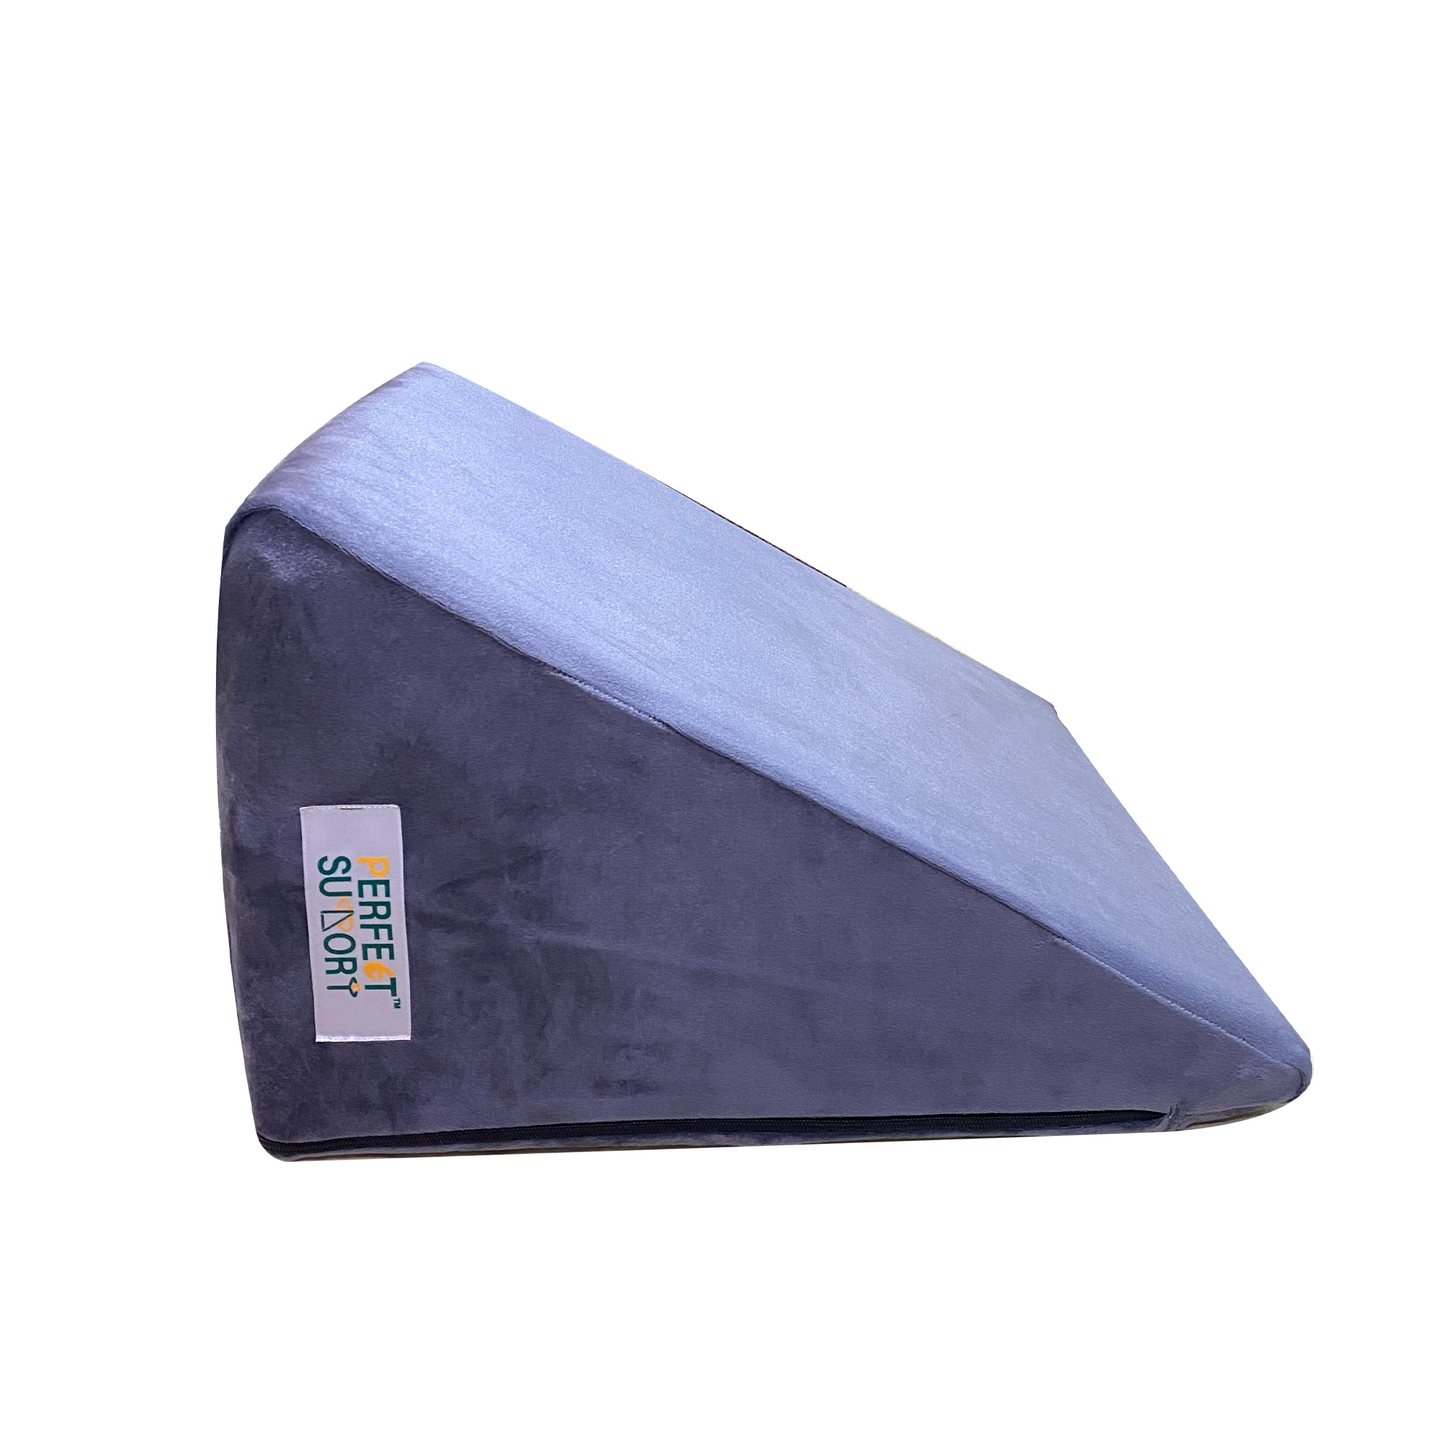 Multipurpose Back support Pillow (Wedge Pillow)